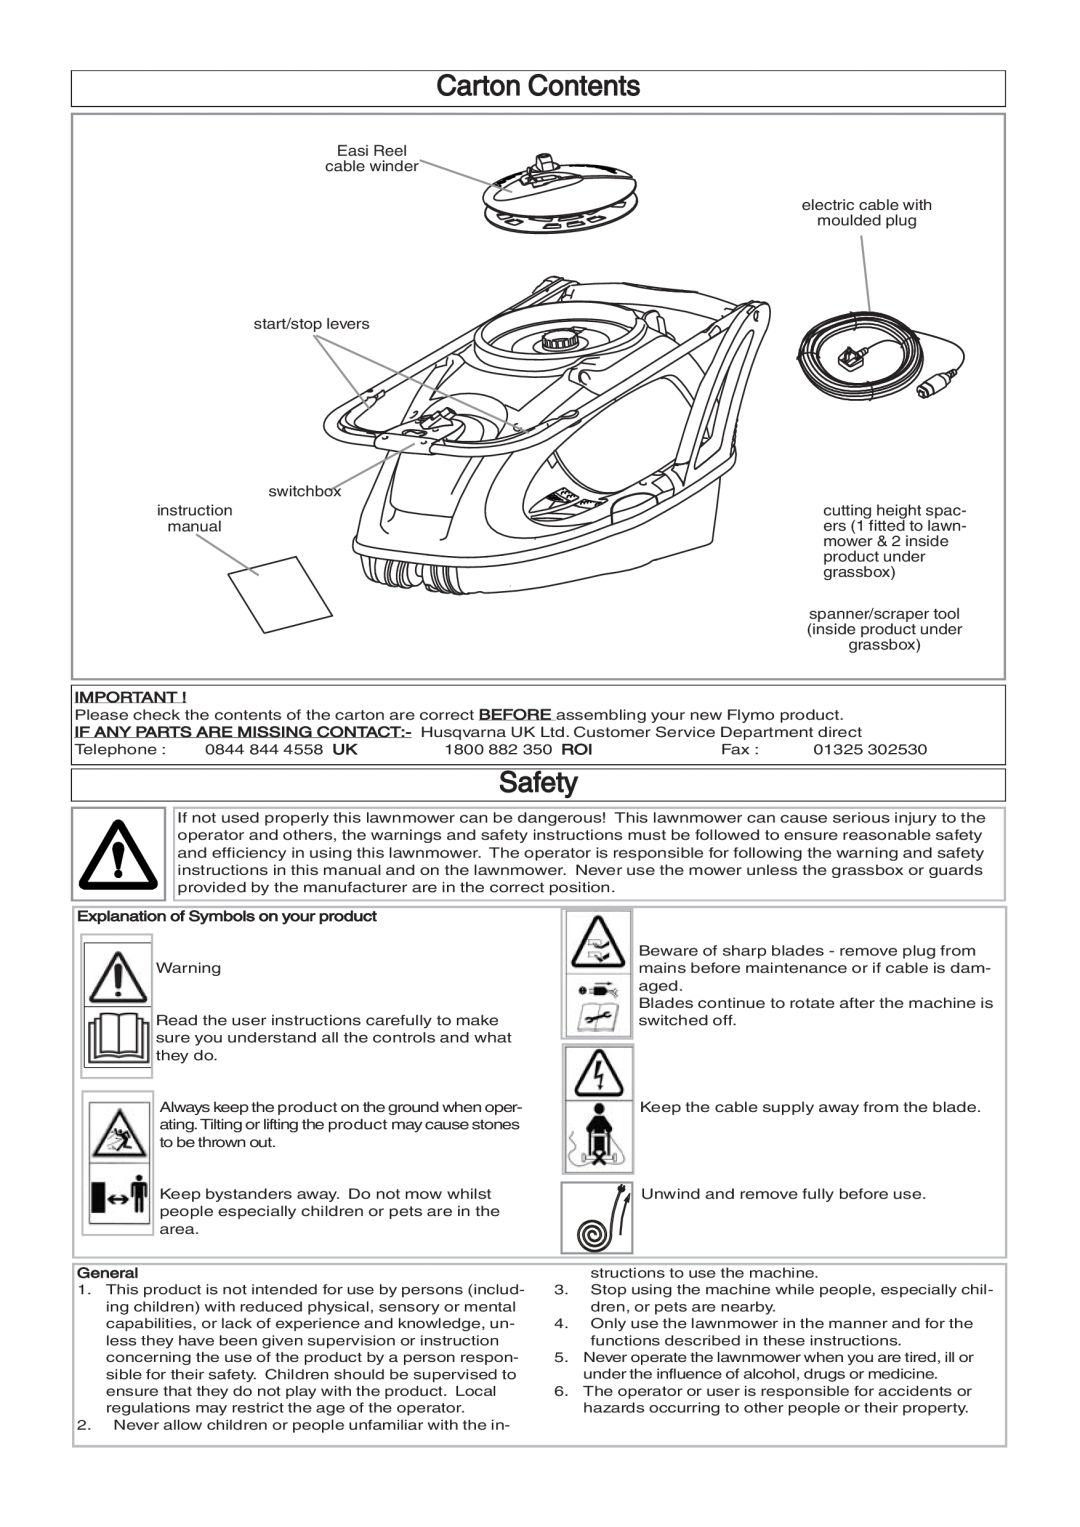 Husqvarna 360, 380 manual Carton Contents, Safety, Explanation of Symbols on your product, General 